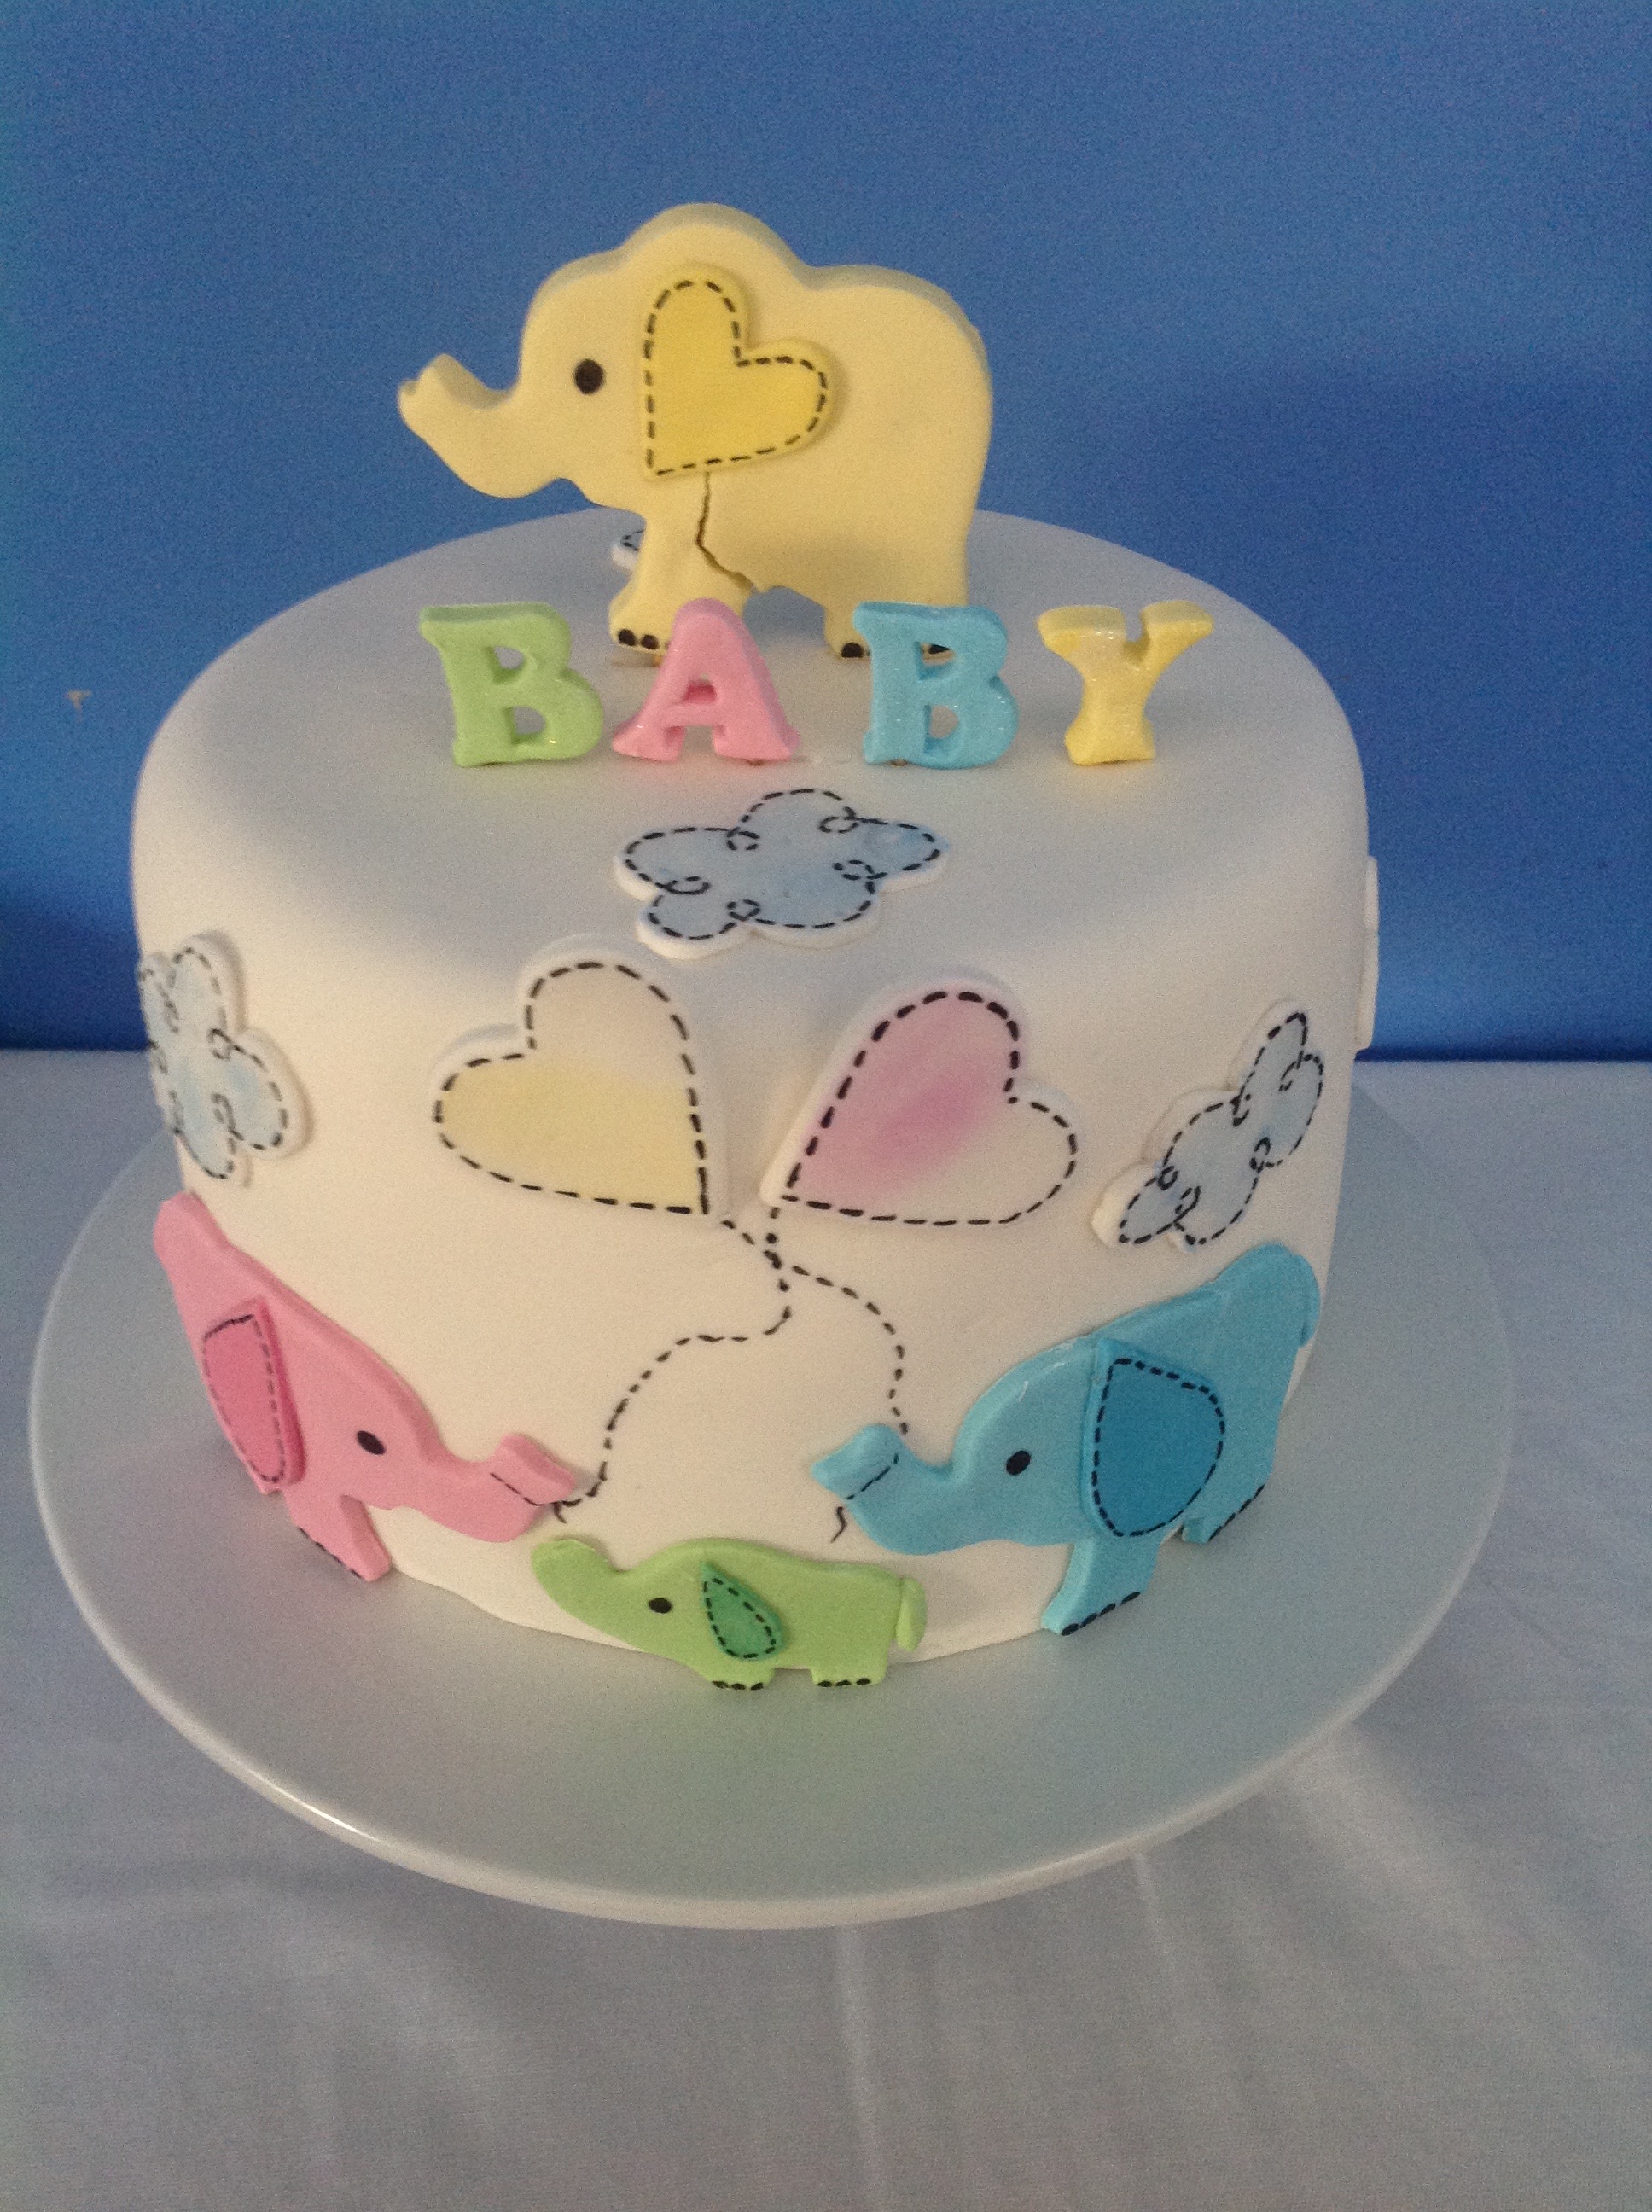 Baby Shower Cakes - Mackay Cakes Excluse Cakes 4 All